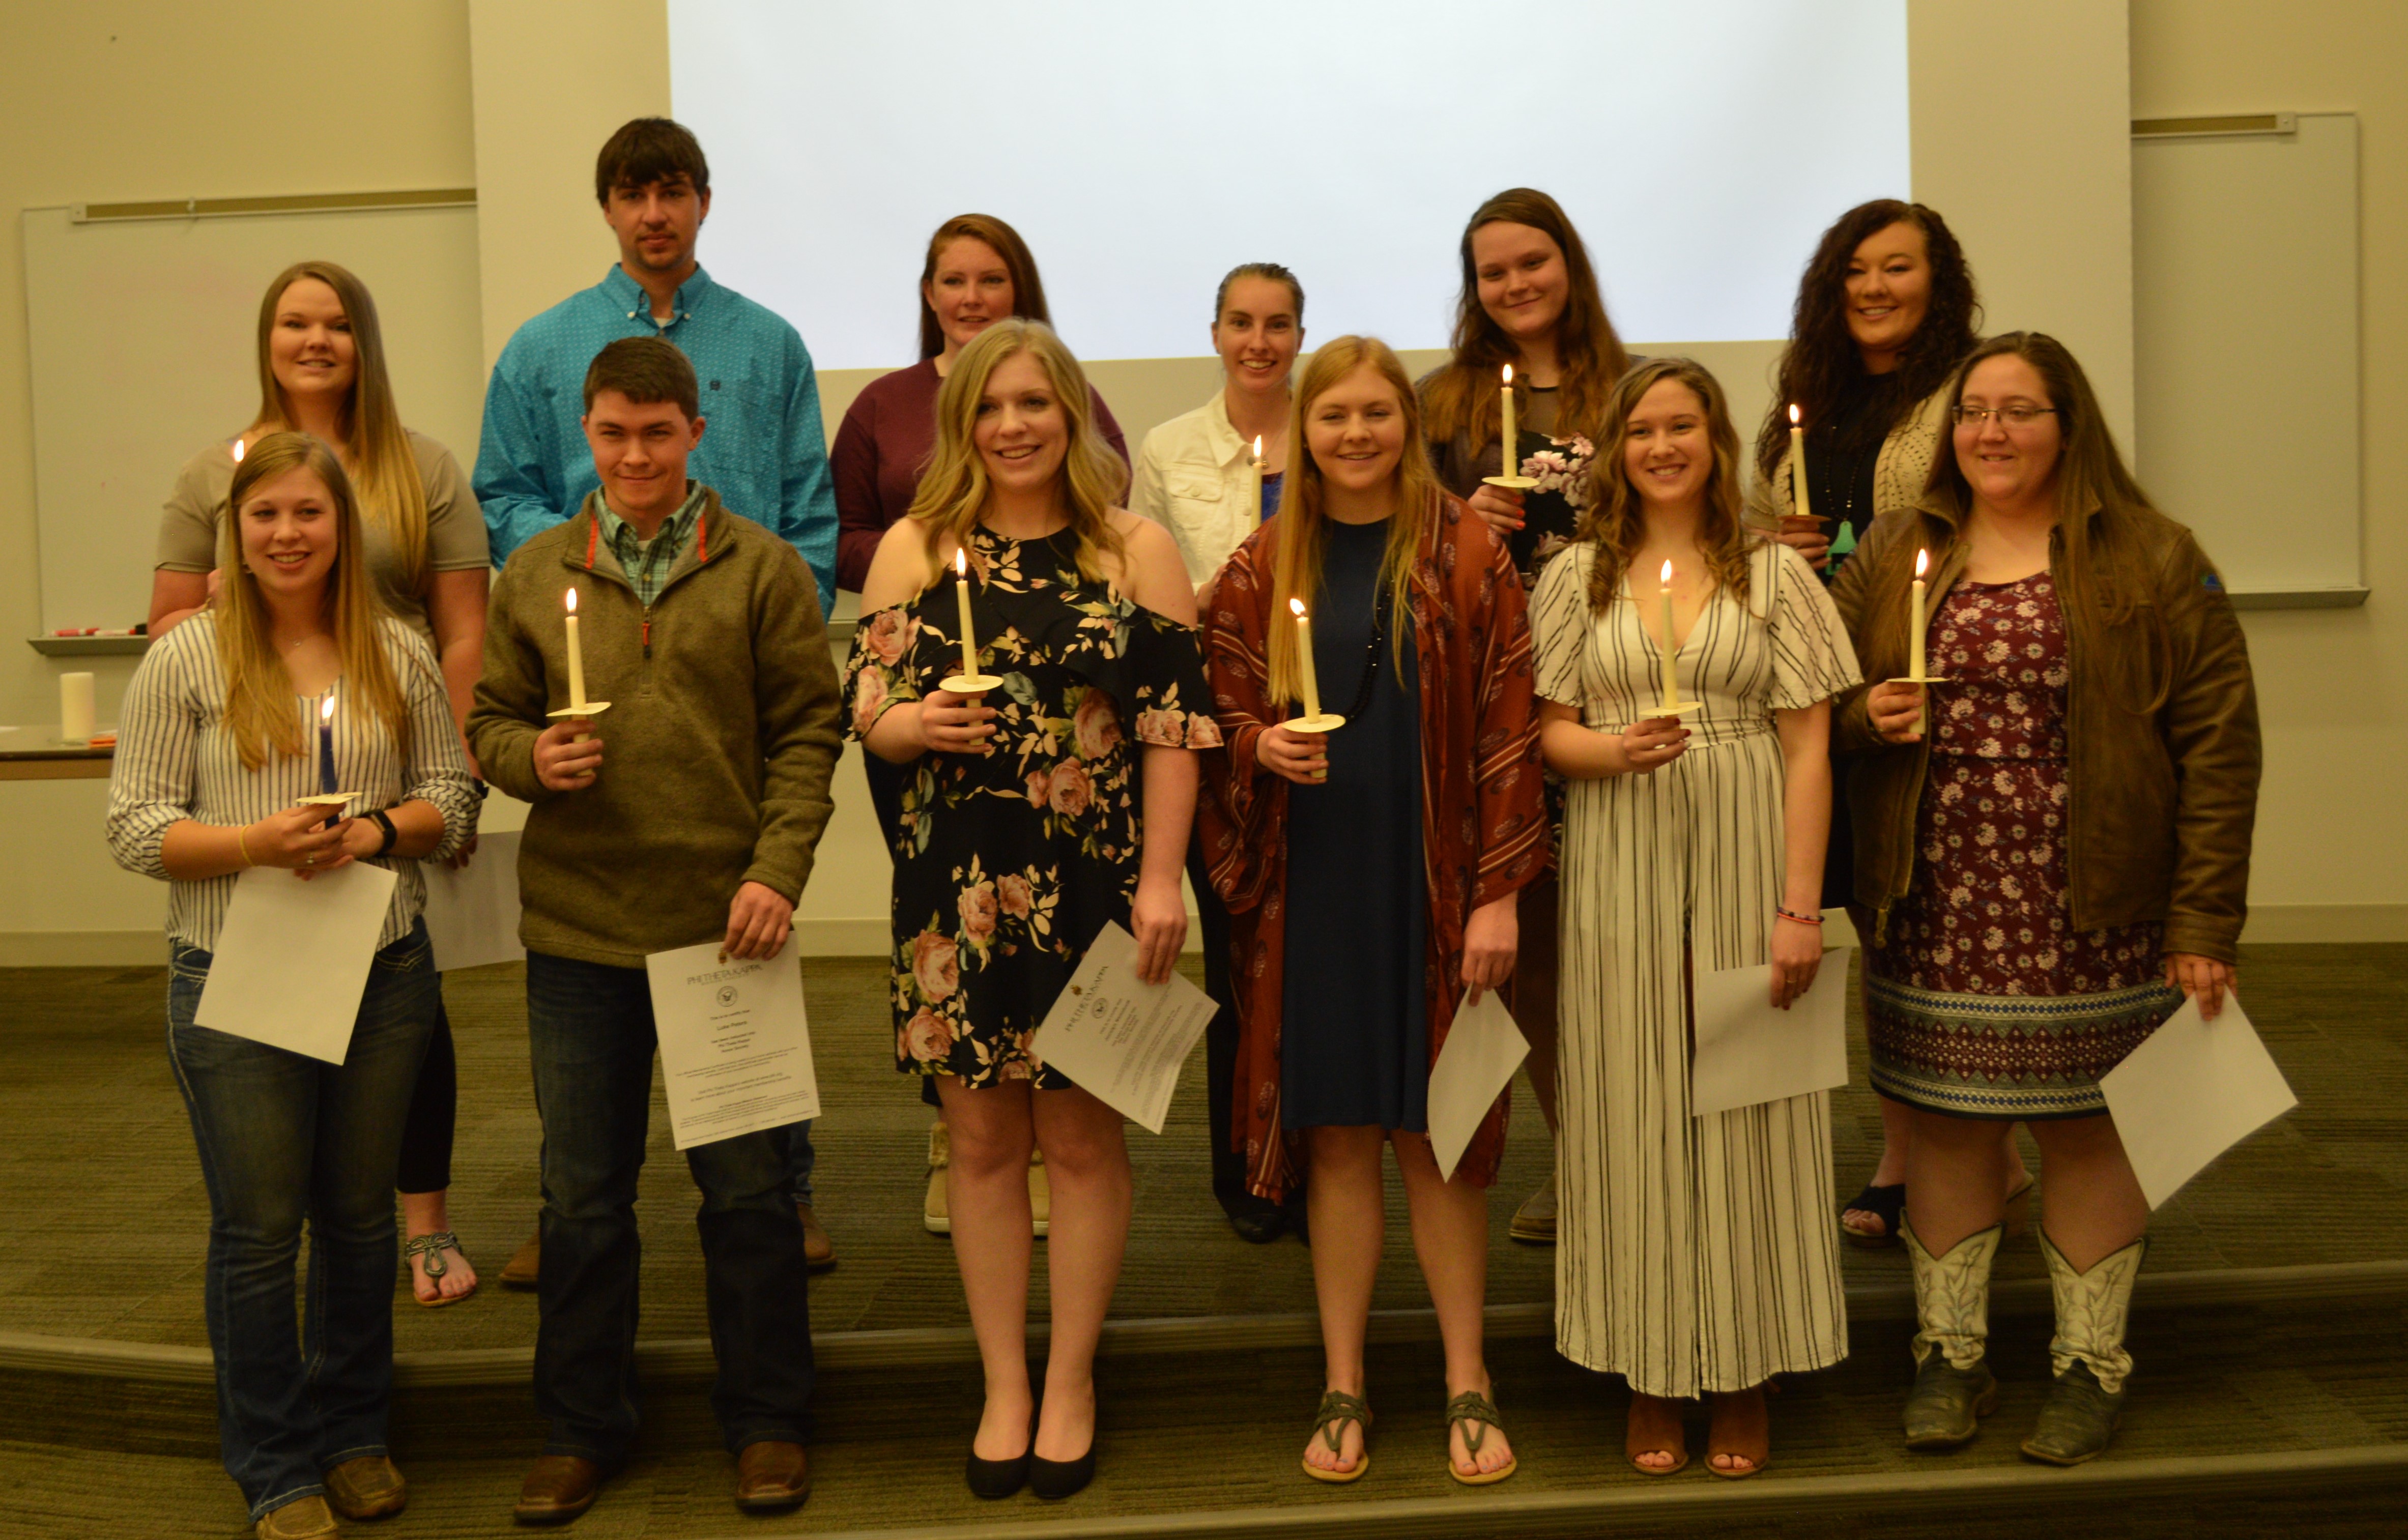 Inductees present for initiation to Phi Theta Kappa at the Nebraska College of Technical Agriculture, Curtis included front, from left: Kelly Gordon, Luke Peters, Jocelyn Kennicutt, Emily Riley, Aurora Urwiler and Alexis Penna. Back row, Morgan Curran, Dean Fleer, Kaylee Hostler, Catherine Ljunggren, Amanda Schmidt, and Kayla Mues. (E. Griffiths / NCTA Photo)